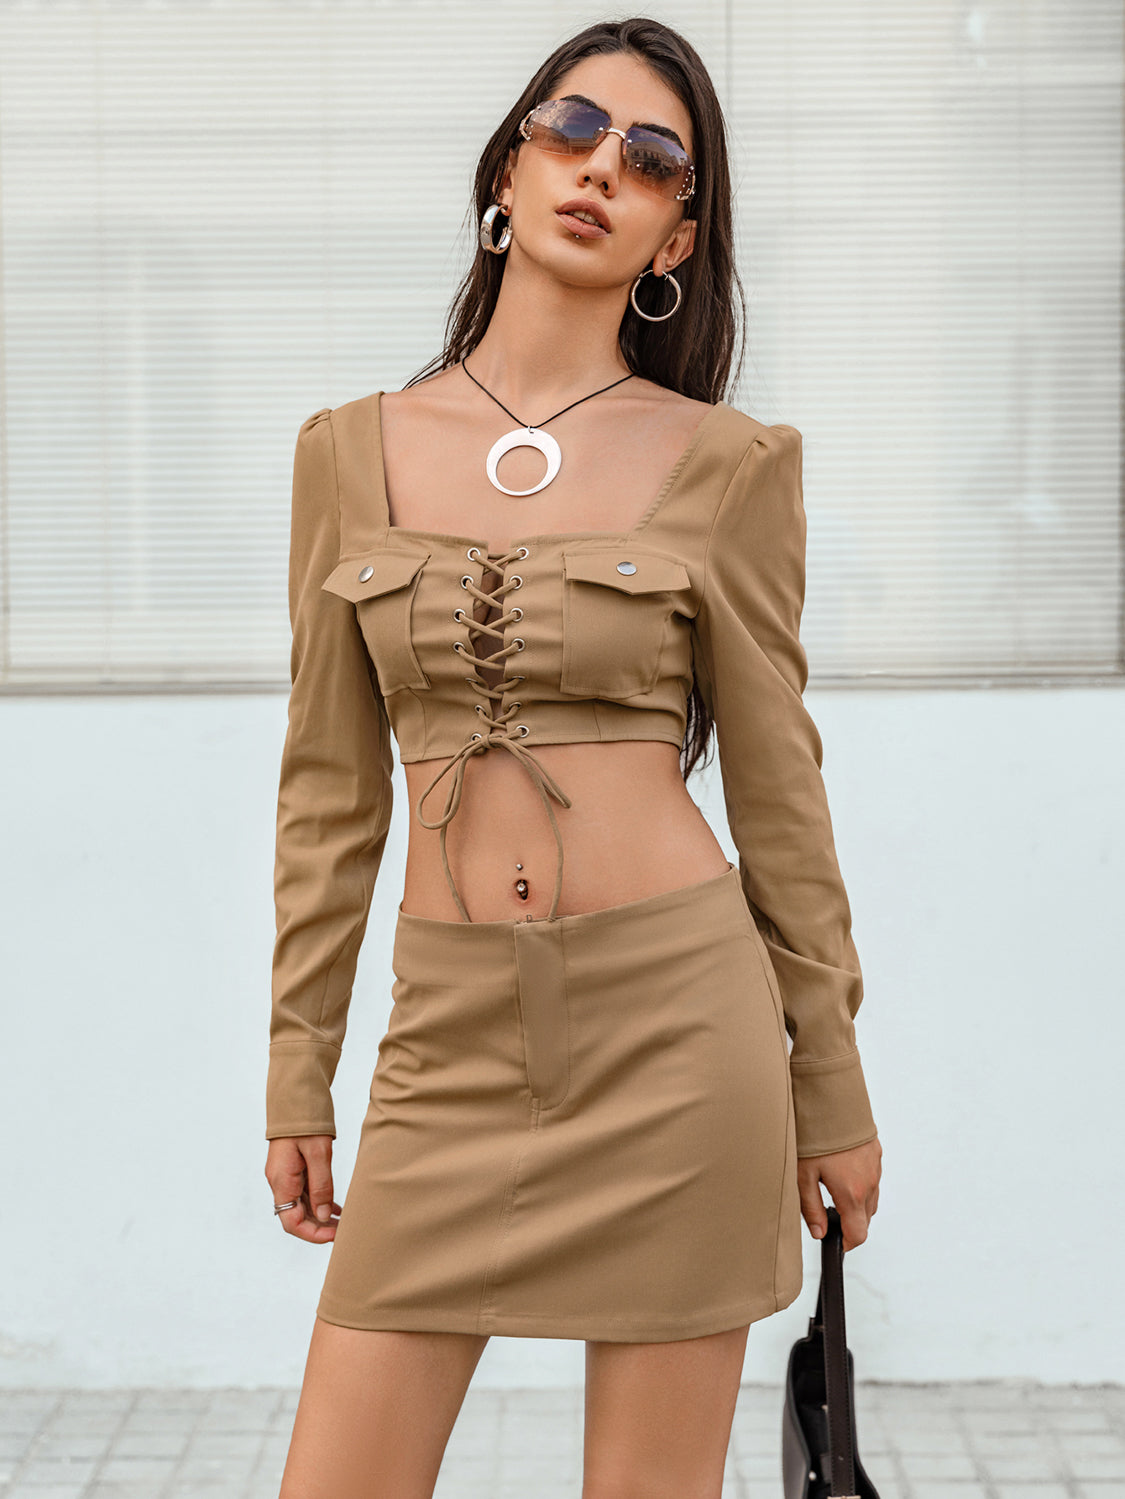 Lace-Up Cropped Top and Skirt Set - Thandynie